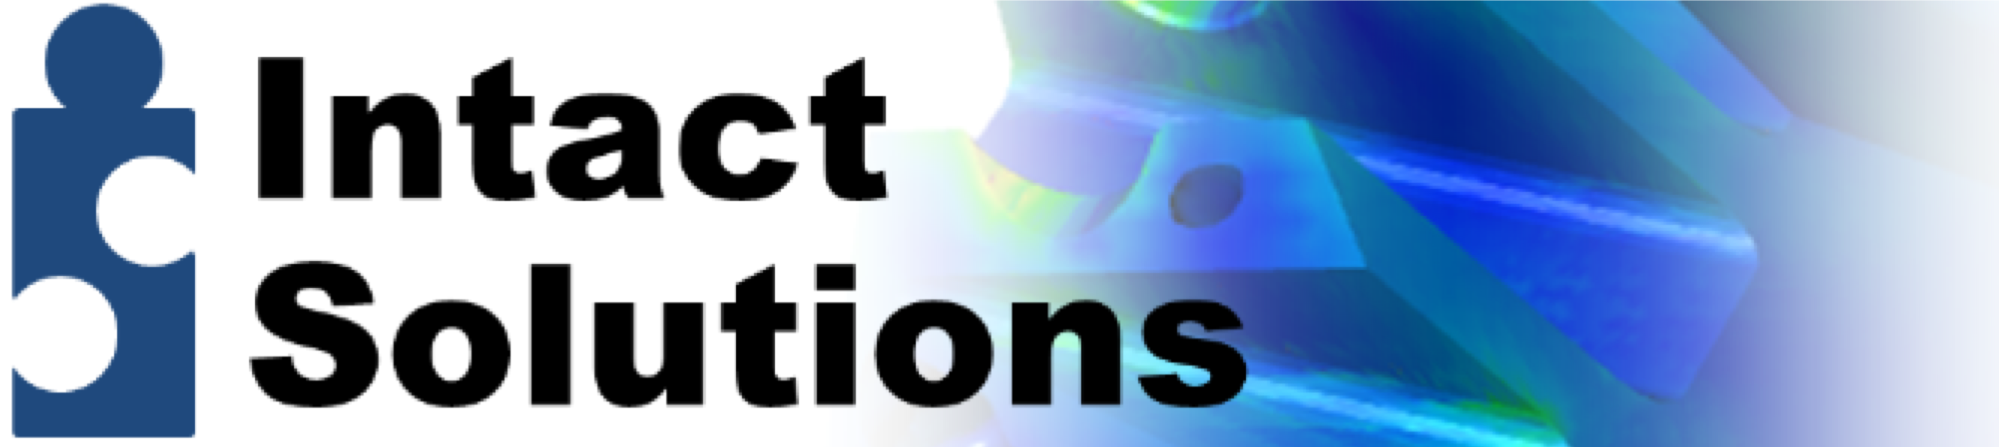 Intact Solutions logo